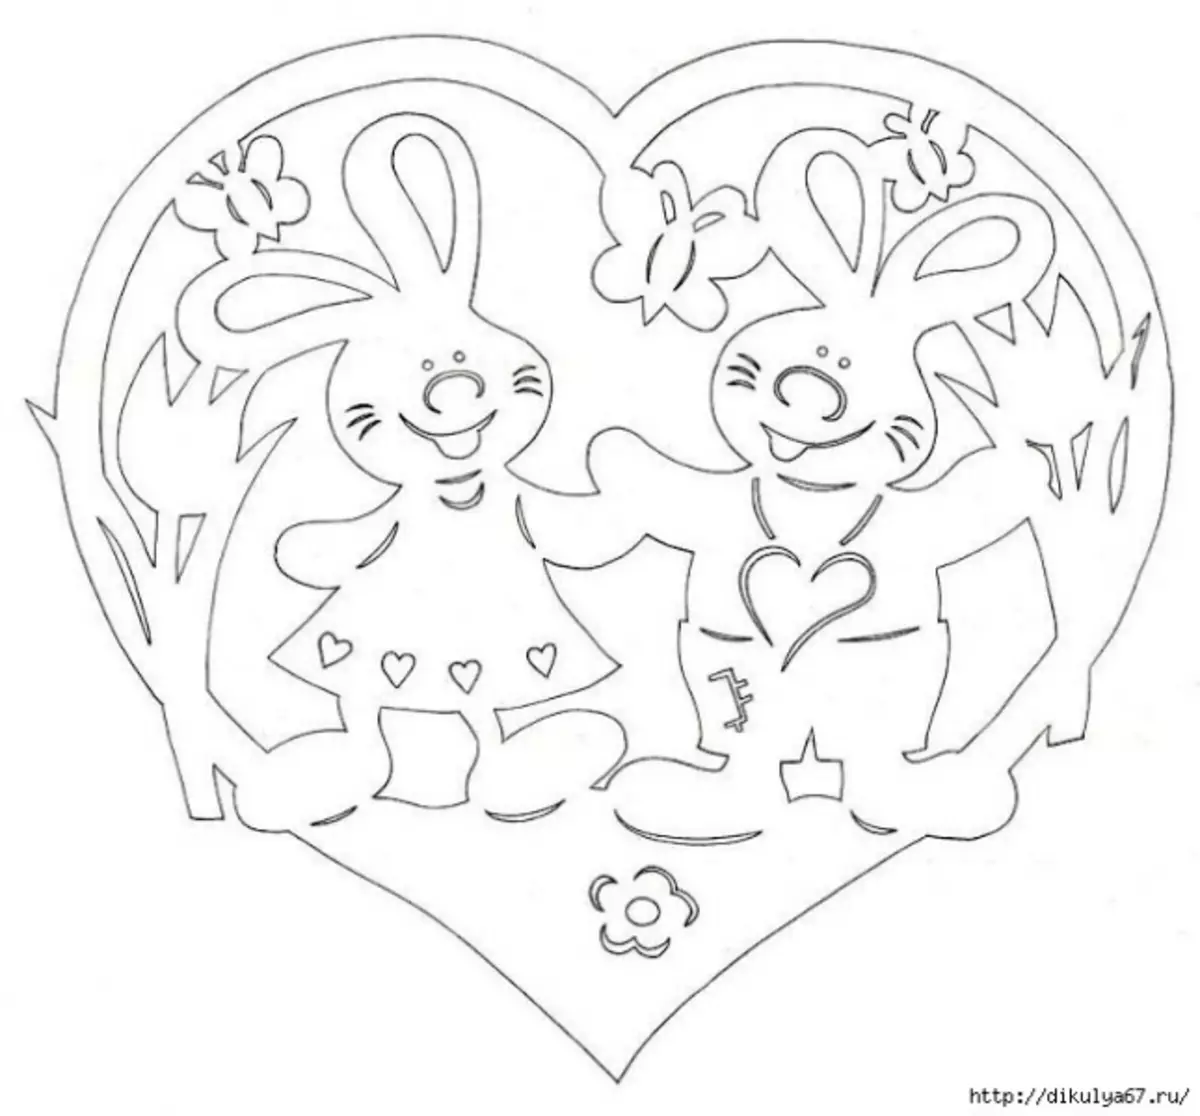 Snowflake paper cutouts for new year and rabbit for Easter